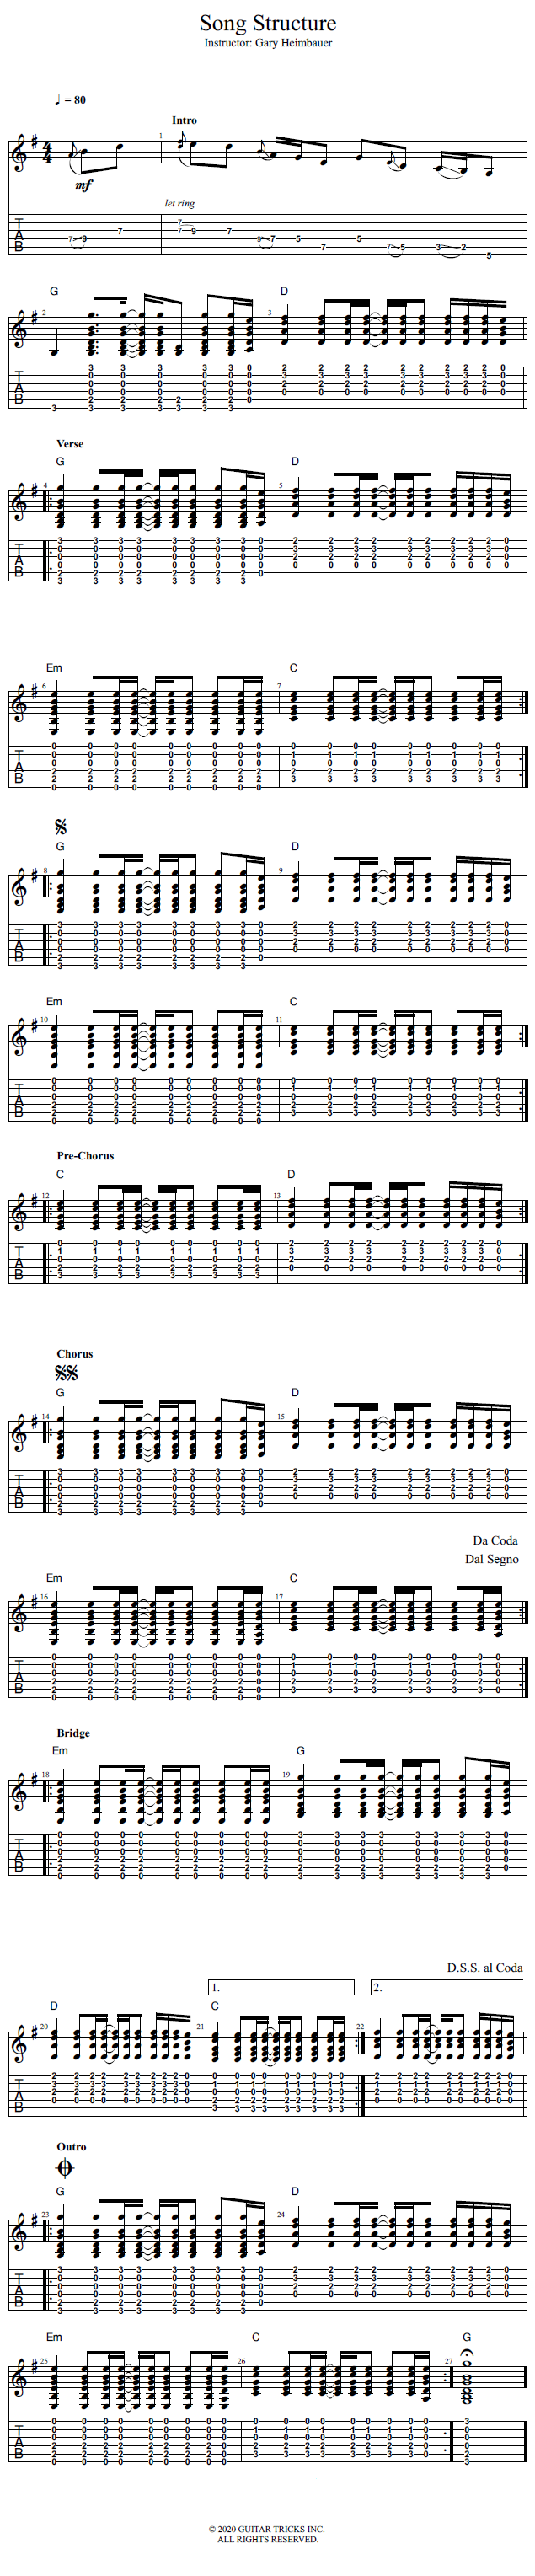 Song Structure song notation